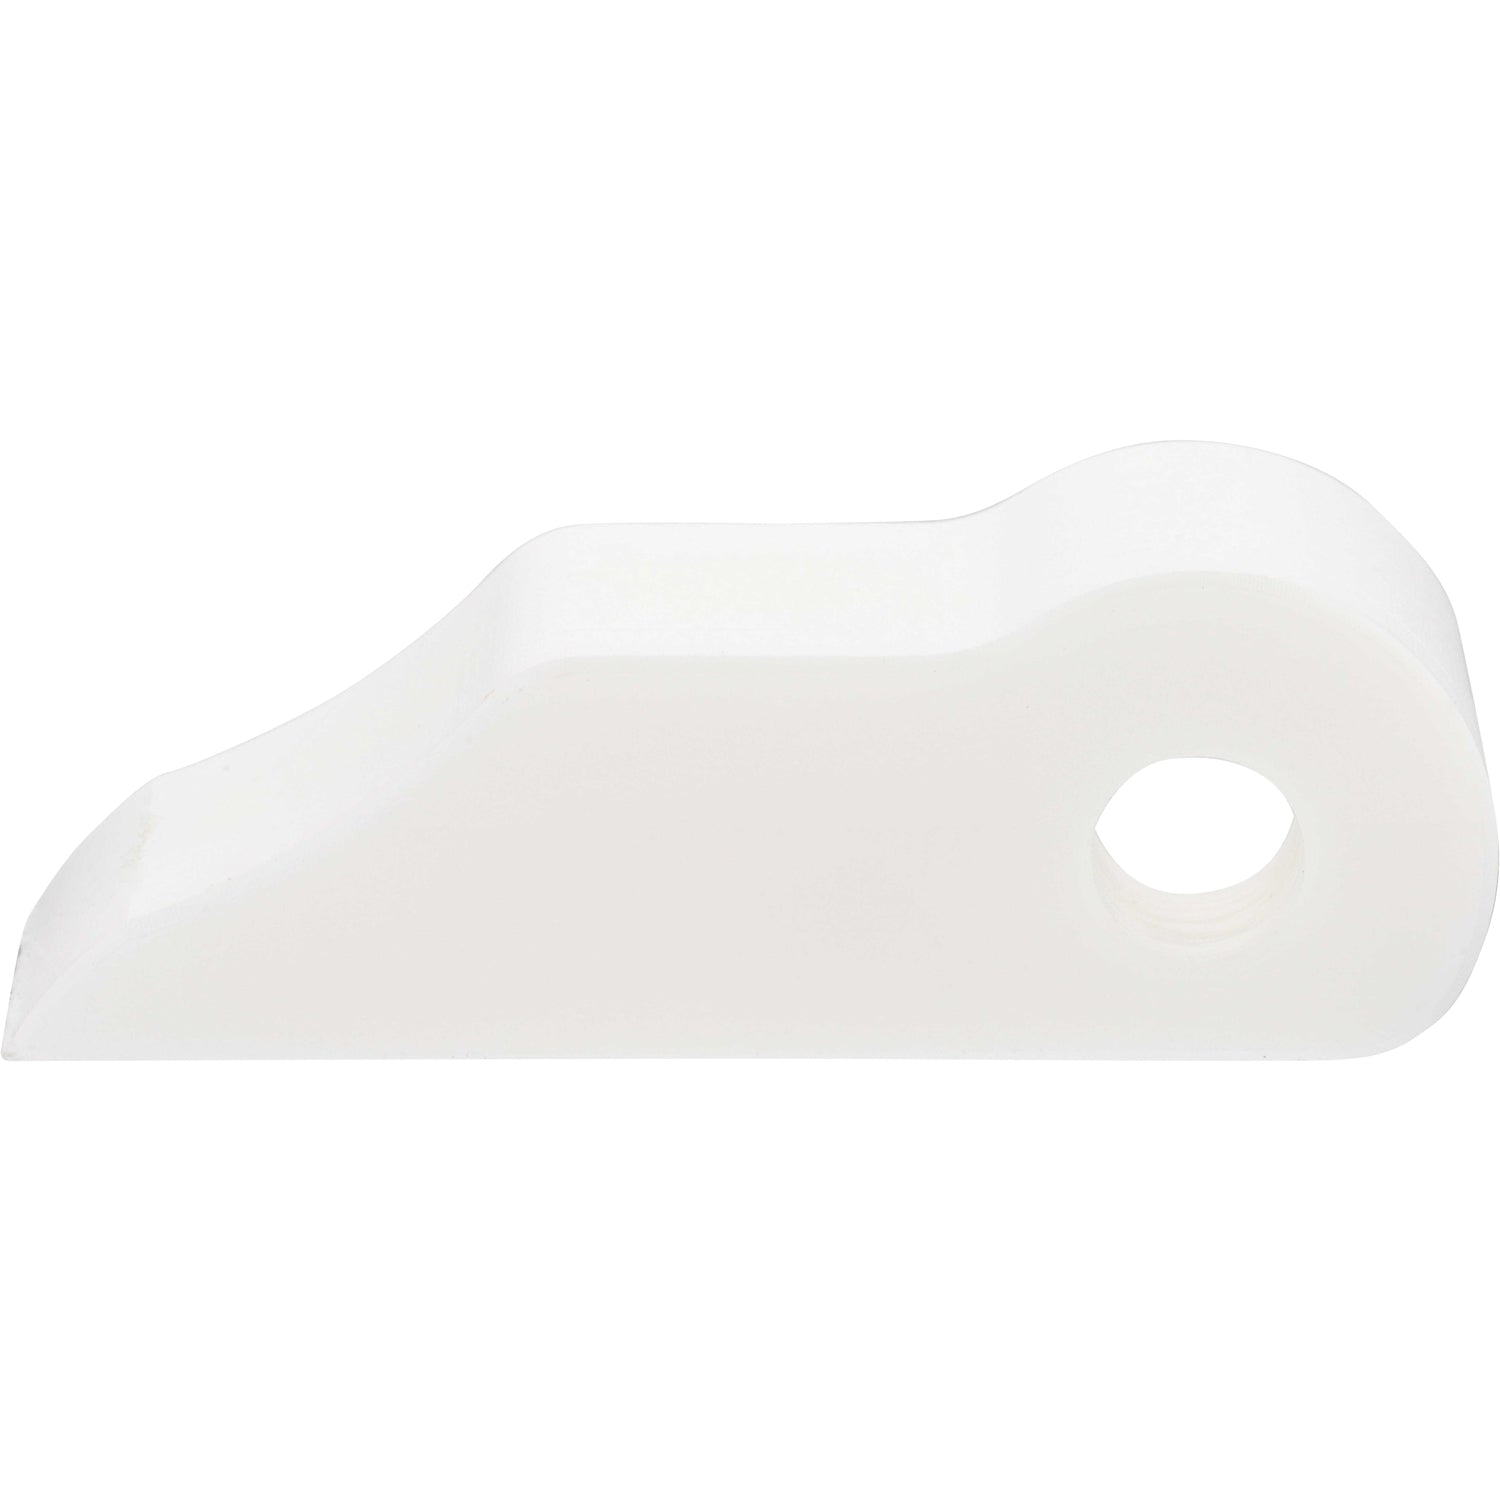 White plastic machined part with rounded edges and a through hole used for mounting. Part shown on white background.